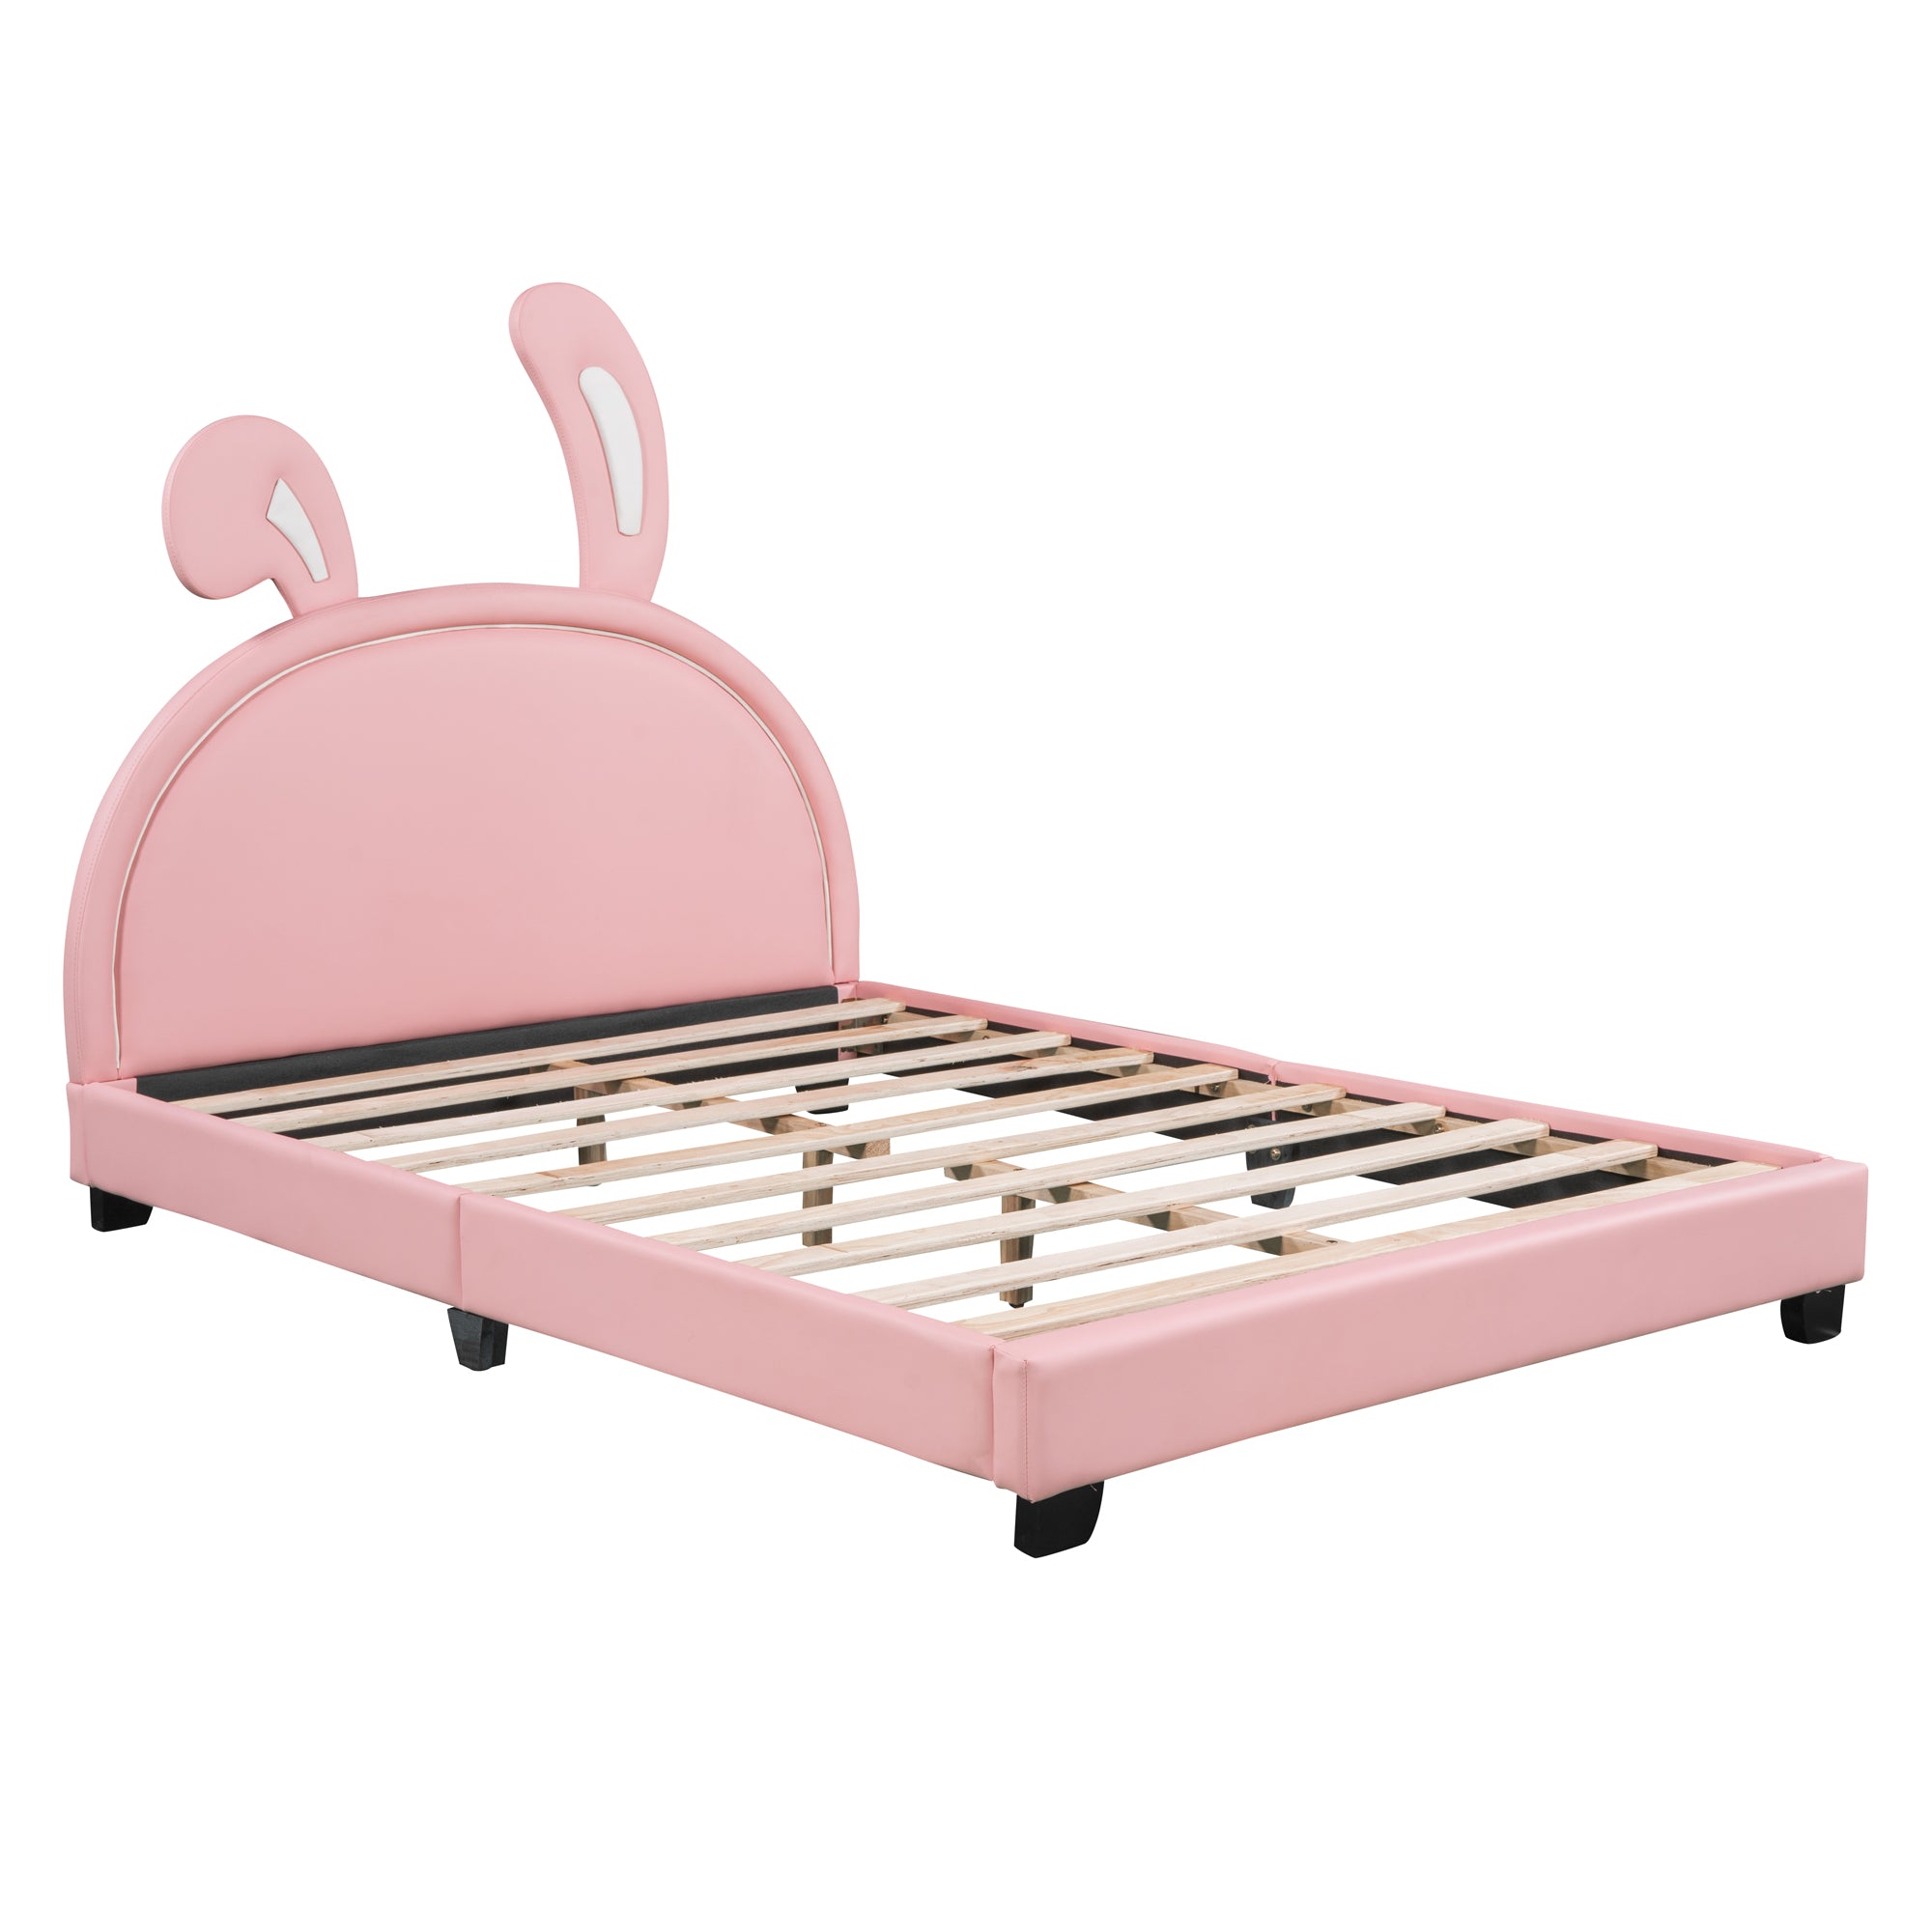 ZNTS Full Size Upholstered Leather Platform Bed with Rabbit Ornament, Pink WF299139AAH